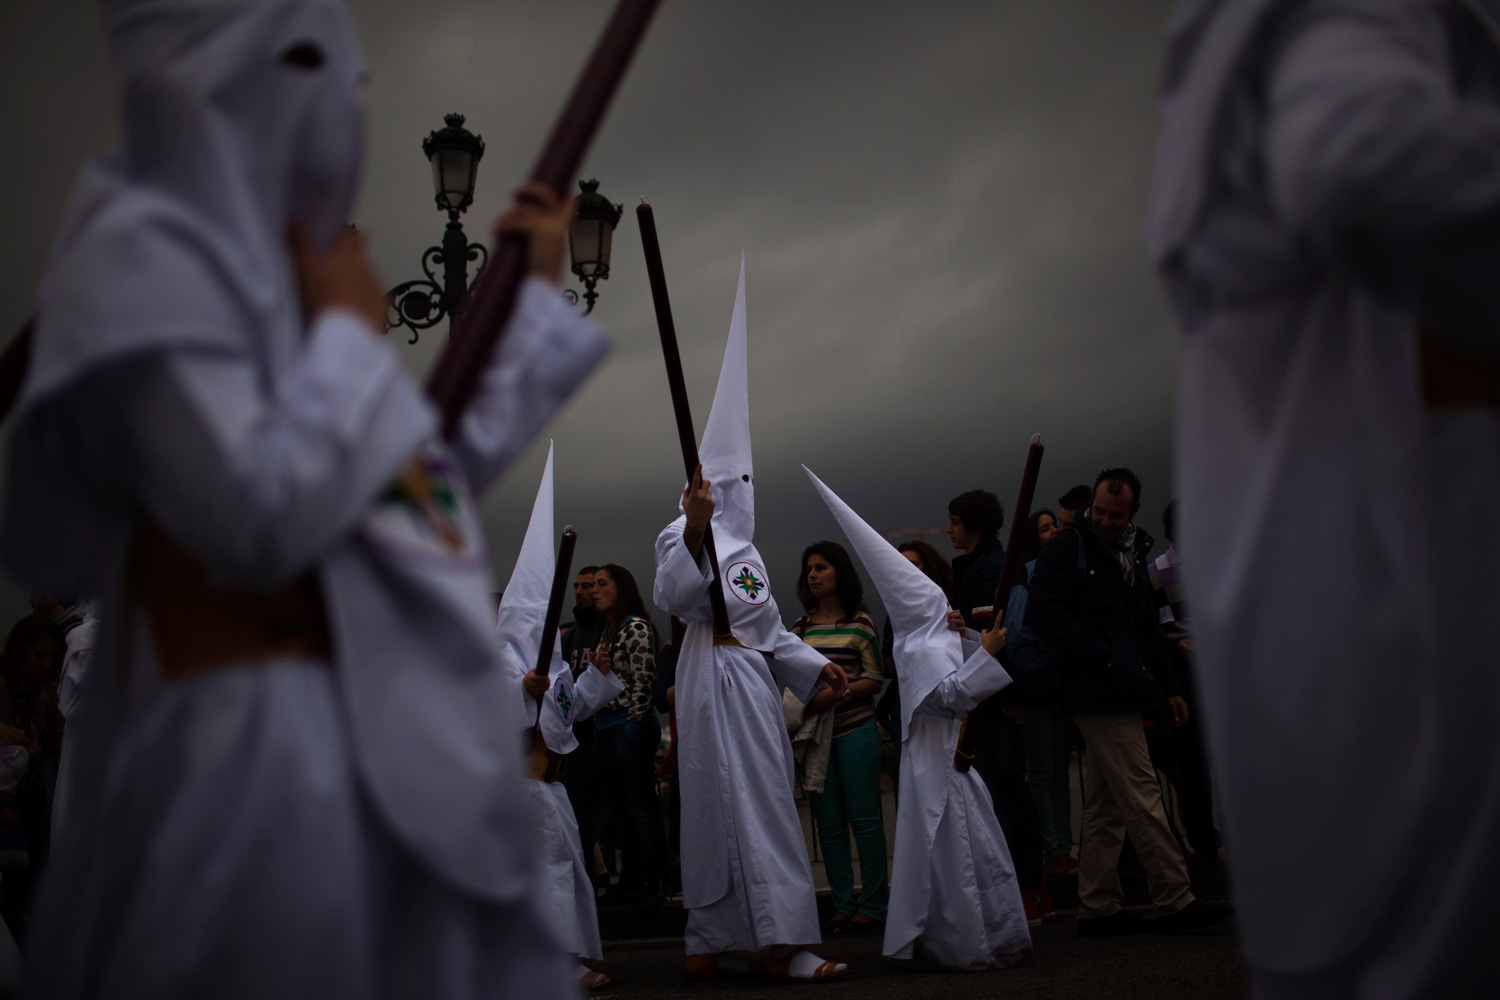 April 2, 2012. Penitents from the  San Gonzalo  brotherhood take part in a procession before a storm in Seville, Spain.